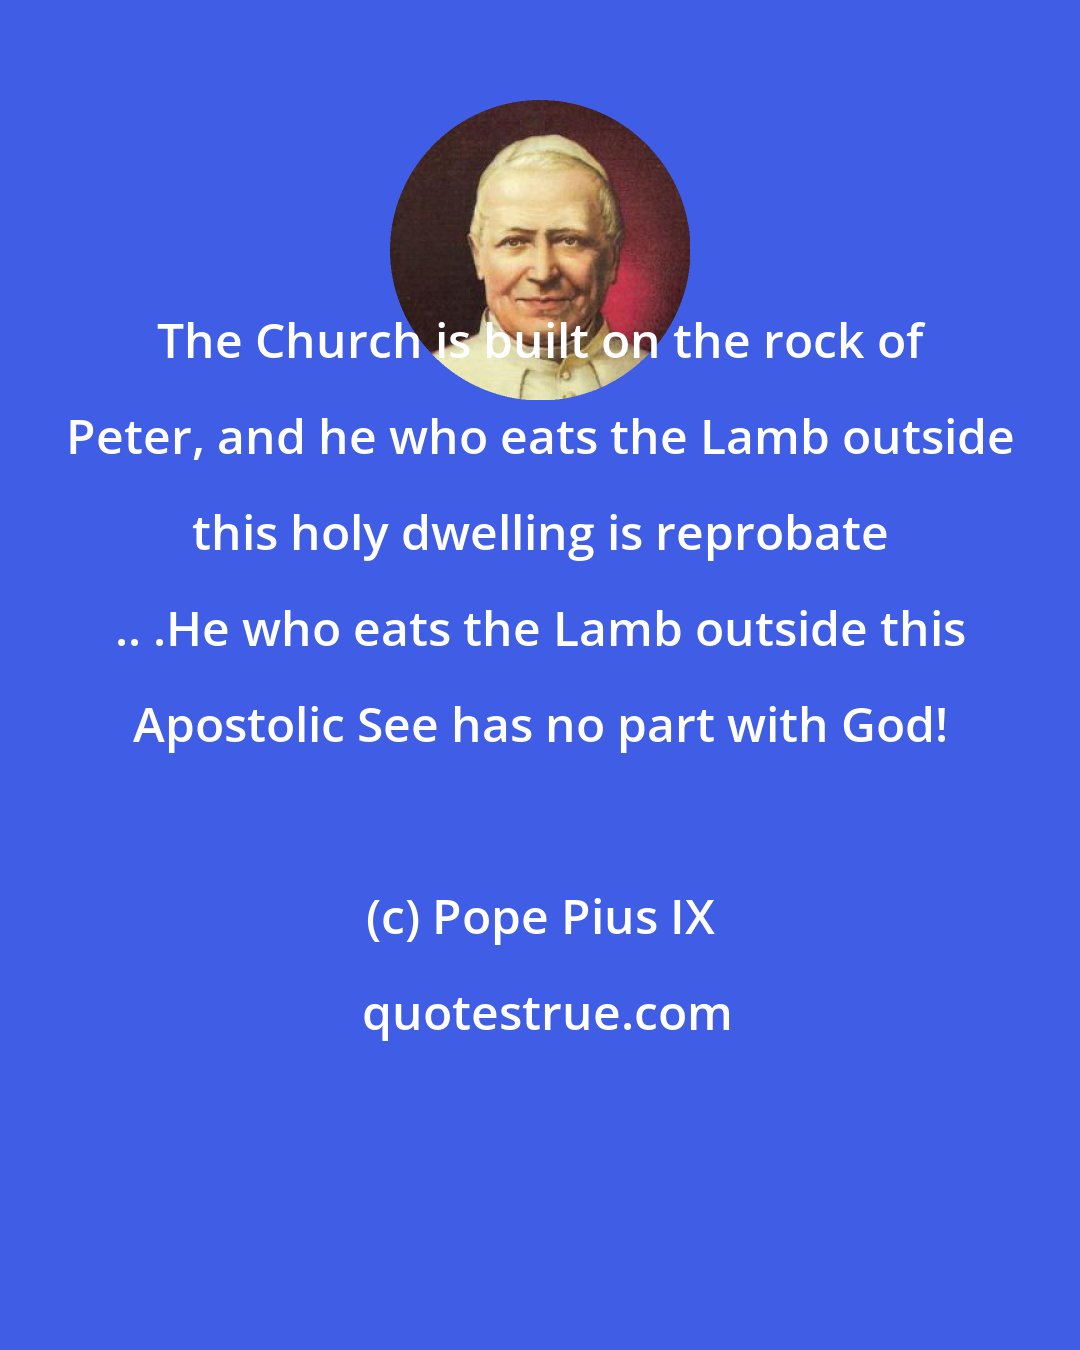 Pope Pius IX: The Church is built on the rock of Peter, and he who eats the Lamb outside this holy dwelling is reprobate .. .He who eats the Lamb outside this Apostolic See has no part with God!